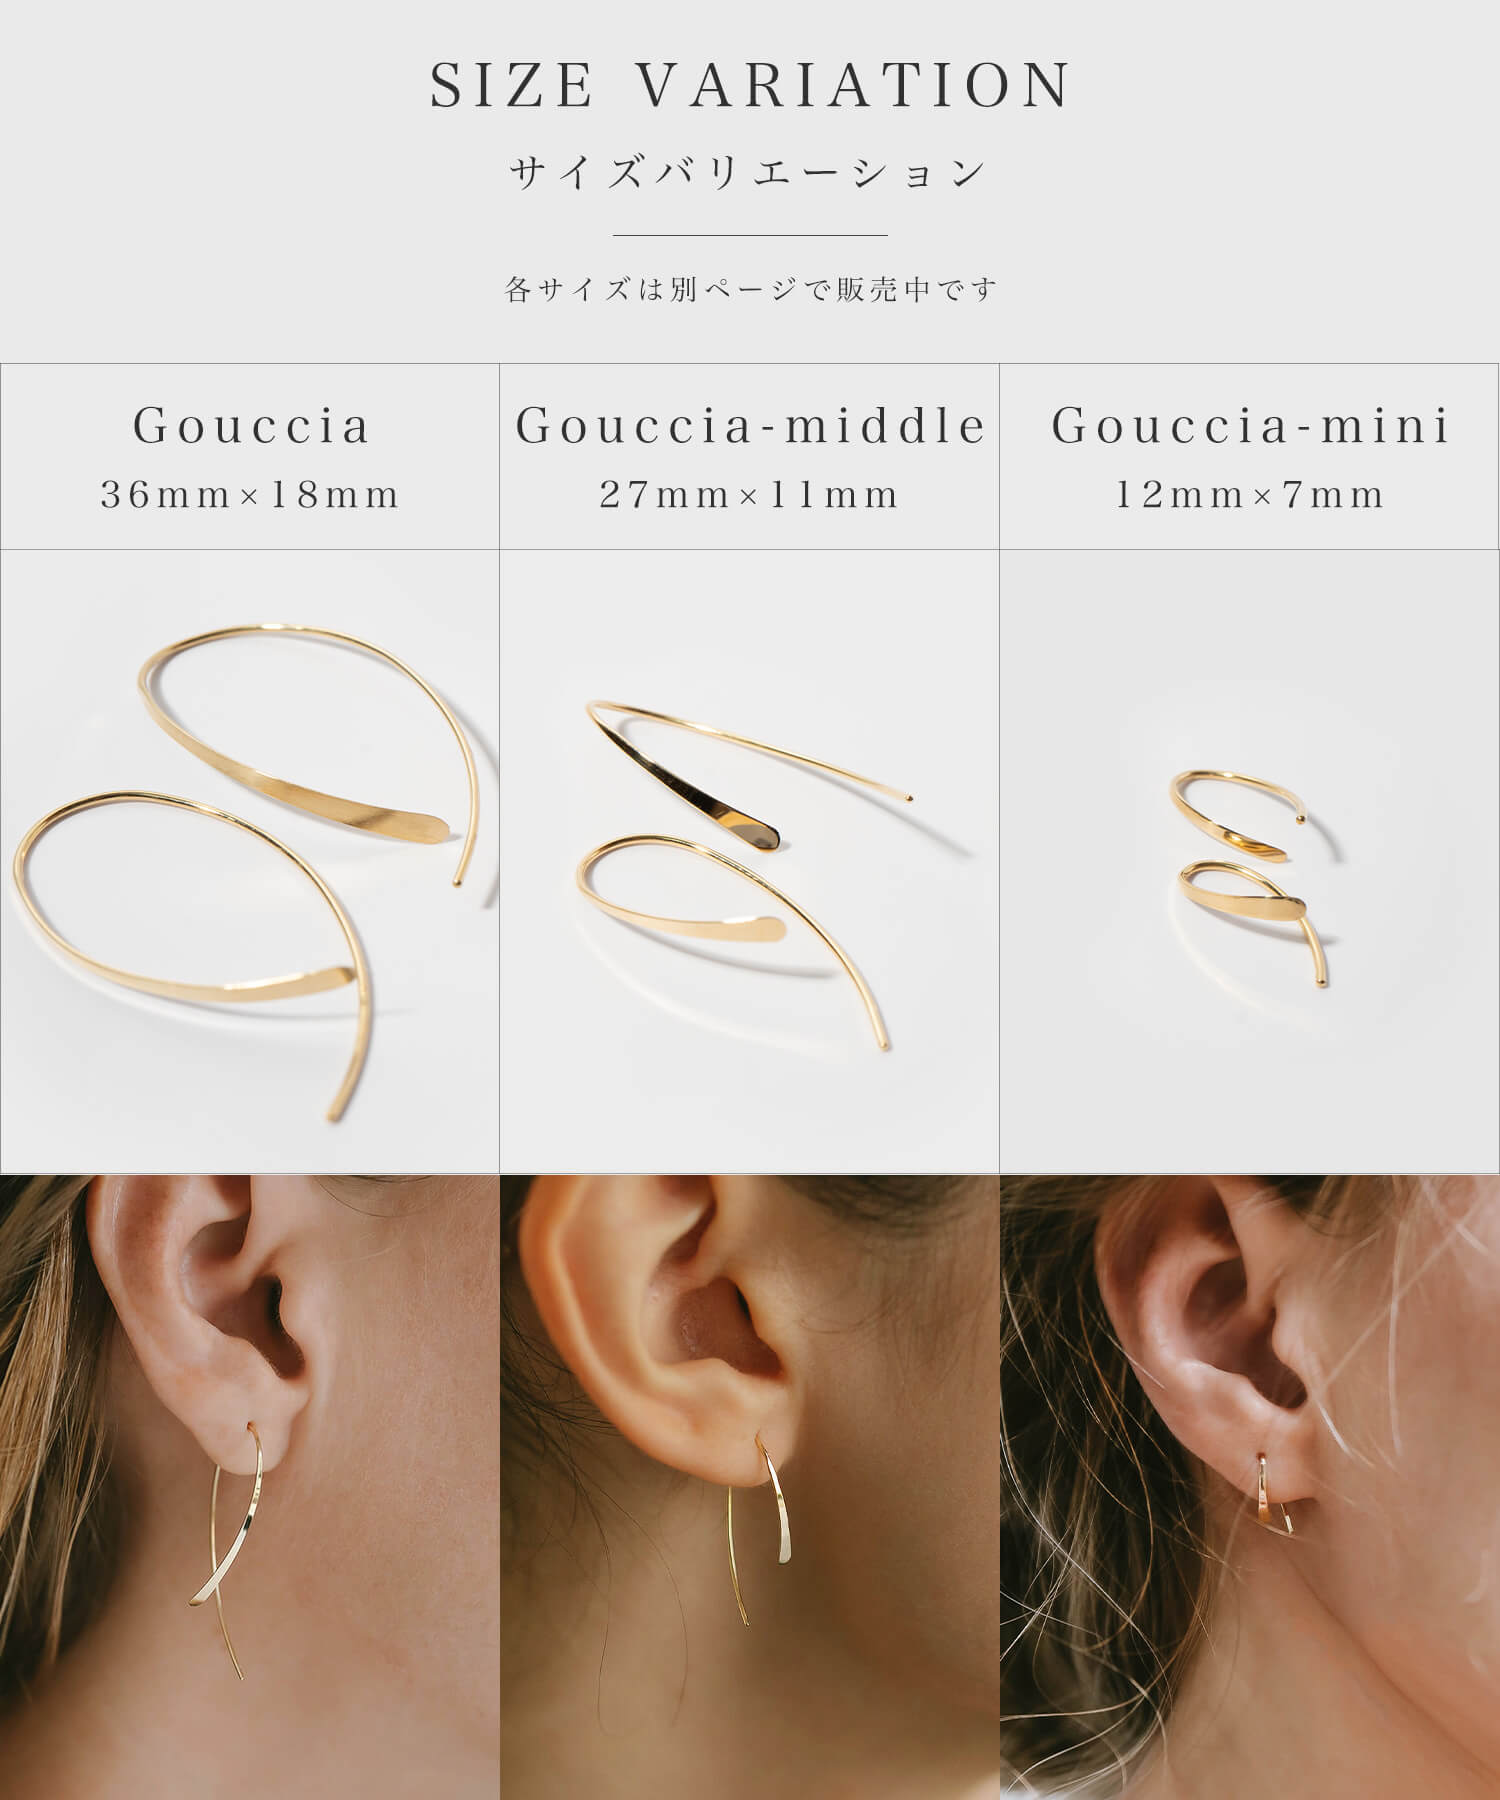 K18 Curve Hang Earrings | GOUCCIA-MIDDLE – Ops. Jewelry